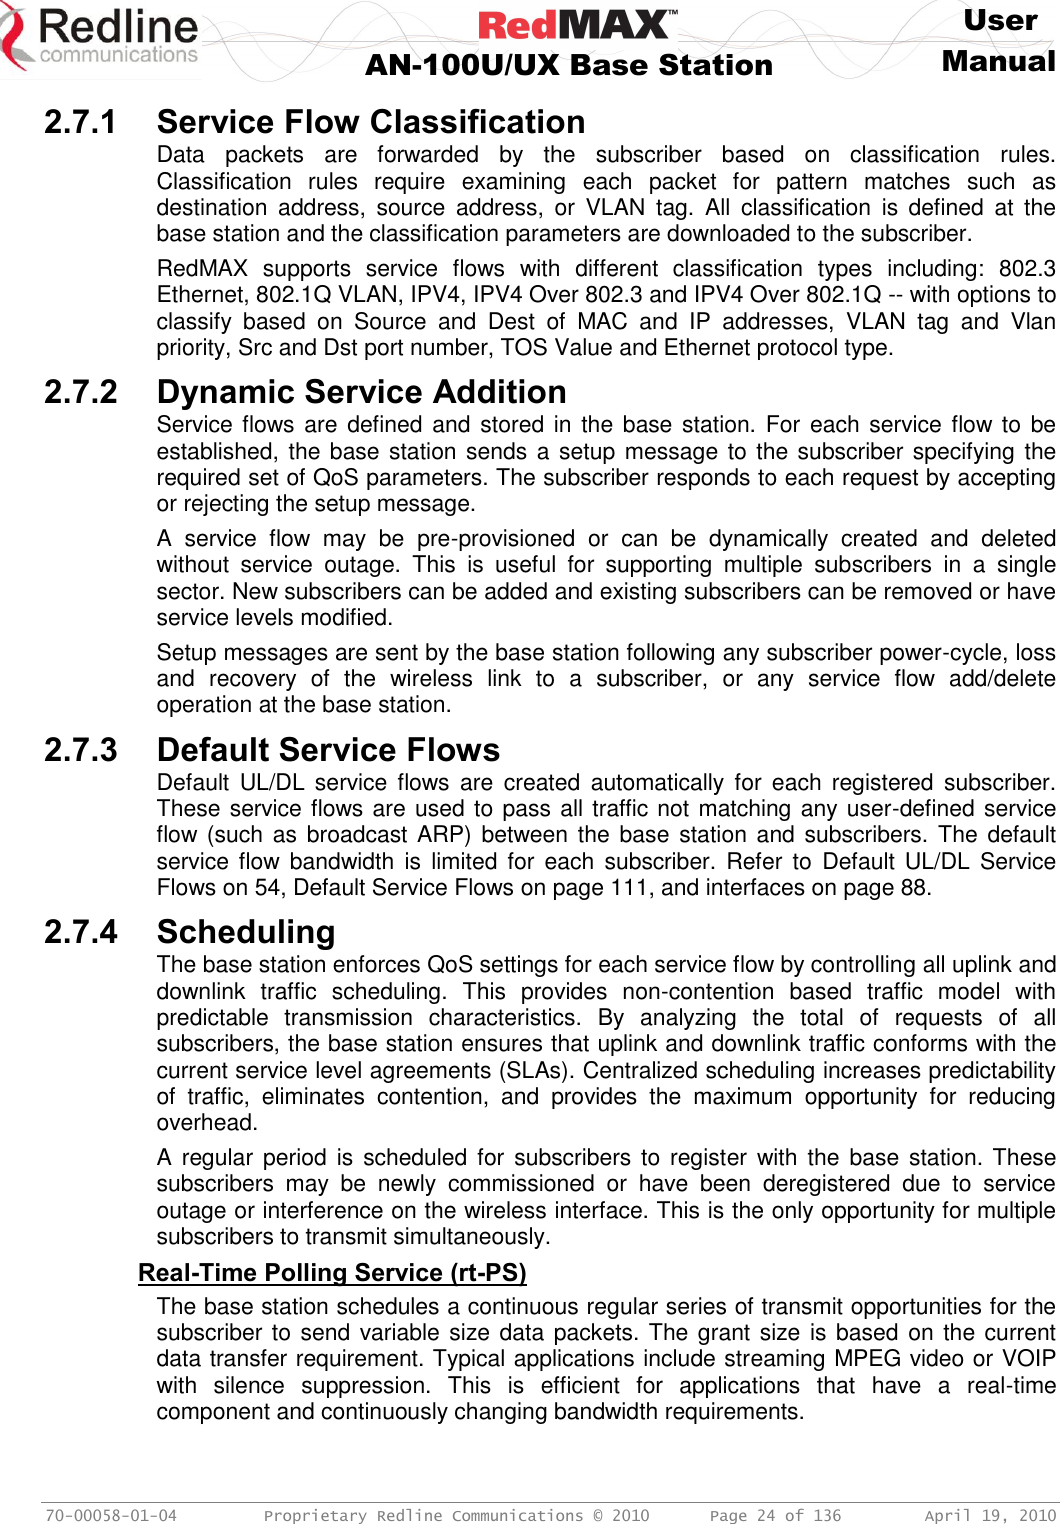     User  AN-100U/UX Base Station Manual   70-00058-01-04  Proprietary Redline Communications © 2010   Page 24 of 136  April 19, 2010 2.7.1 Service Flow Classification Data  packets  are  forwarded  by  the  subscriber  based  on  classification  rules. Classification  rules  require  examining  each  packet  for  pattern  matches  such  as destination  address,  source  address,  or  VLAN  tag.  All  classification  is  defined  at  the base station and the classification parameters are downloaded to the subscriber. RedMAX  supports  service  flows  with  different  classification  types  including:  802.3 Ethernet, 802.1Q VLAN, IPV4, IPV4 Over 802.3 and IPV4 Over 802.1Q -- with options to classify  based  on  Source  and  Dest  of  MAC  and  IP  addresses,  VLAN  tag  and  Vlan priority, Src and Dst port number, TOS Value and Ethernet protocol type. 2.7.2 Dynamic Service Addition Service flows are defined and stored  in  the base station. For  each service flow to be established, the base station sends a setup message to the subscriber specifying the required set of QoS parameters. The subscriber responds to each request by accepting or rejecting the setup message.  A  service  flow  may  be  pre-provisioned  or  can  be  dynamically  created  and  deleted without  service  outage.  This  is  useful  for  supporting  multiple  subscribers  in  a  single sector. New subscribers can be added and existing subscribers can be removed or have service levels modified. Setup messages are sent by the base station following any subscriber power-cycle, loss and  recovery  of  the  wireless  link  to  a  subscriber,  or  any  service  flow  add/delete operation at the base station.  2.7.3 Default Service Flows Default  UL/DL  service  flows  are  created  automatically  for  each  registered  subscriber. These service flows are used to pass all traffic not matching any user-defined service flow (such as  broadcast ARP) between the base station  and subscribers. The  default service flow  bandwidth  is  limited  for  each  subscriber.  Refer  to  Default  UL/DL  Service Flows on 54, Default Service Flows on page 111, and interfaces on page 88. 2.7.4 Scheduling The base station enforces QoS settings for each service flow by controlling all uplink and downlink  traffic  scheduling.  This  provides  non-contention  based  traffic  model  with predictable  transmission  characteristics.  By  analyzing  the  total  of  requests  of  all subscribers, the base station ensures that uplink and downlink traffic conforms with the current service level agreements (SLAs). Centralized scheduling increases predictability of  traffic,  eliminates  contention,  and  provides  the  maximum  opportunity  for  reducing overhead. A regular  period  is scheduled for  subscribers to  register  with the  base station.  These subscribers  may  be  newly  commissioned  or  have  been  deregistered  due  to  service outage or interference on the wireless interface. This is the only opportunity for multiple subscribers to transmit simultaneously.  Real-Time Polling Service (rt-PS) The base station schedules a continuous regular series of transmit opportunities for the subscriber to send variable size data packets. The grant size is based on the current data transfer requirement. Typical applications include streaming MPEG video or VOIP with  silence  suppression.  This  is  efficient  for  applications  that  have  a  real-time component and continuously changing bandwidth requirements. 